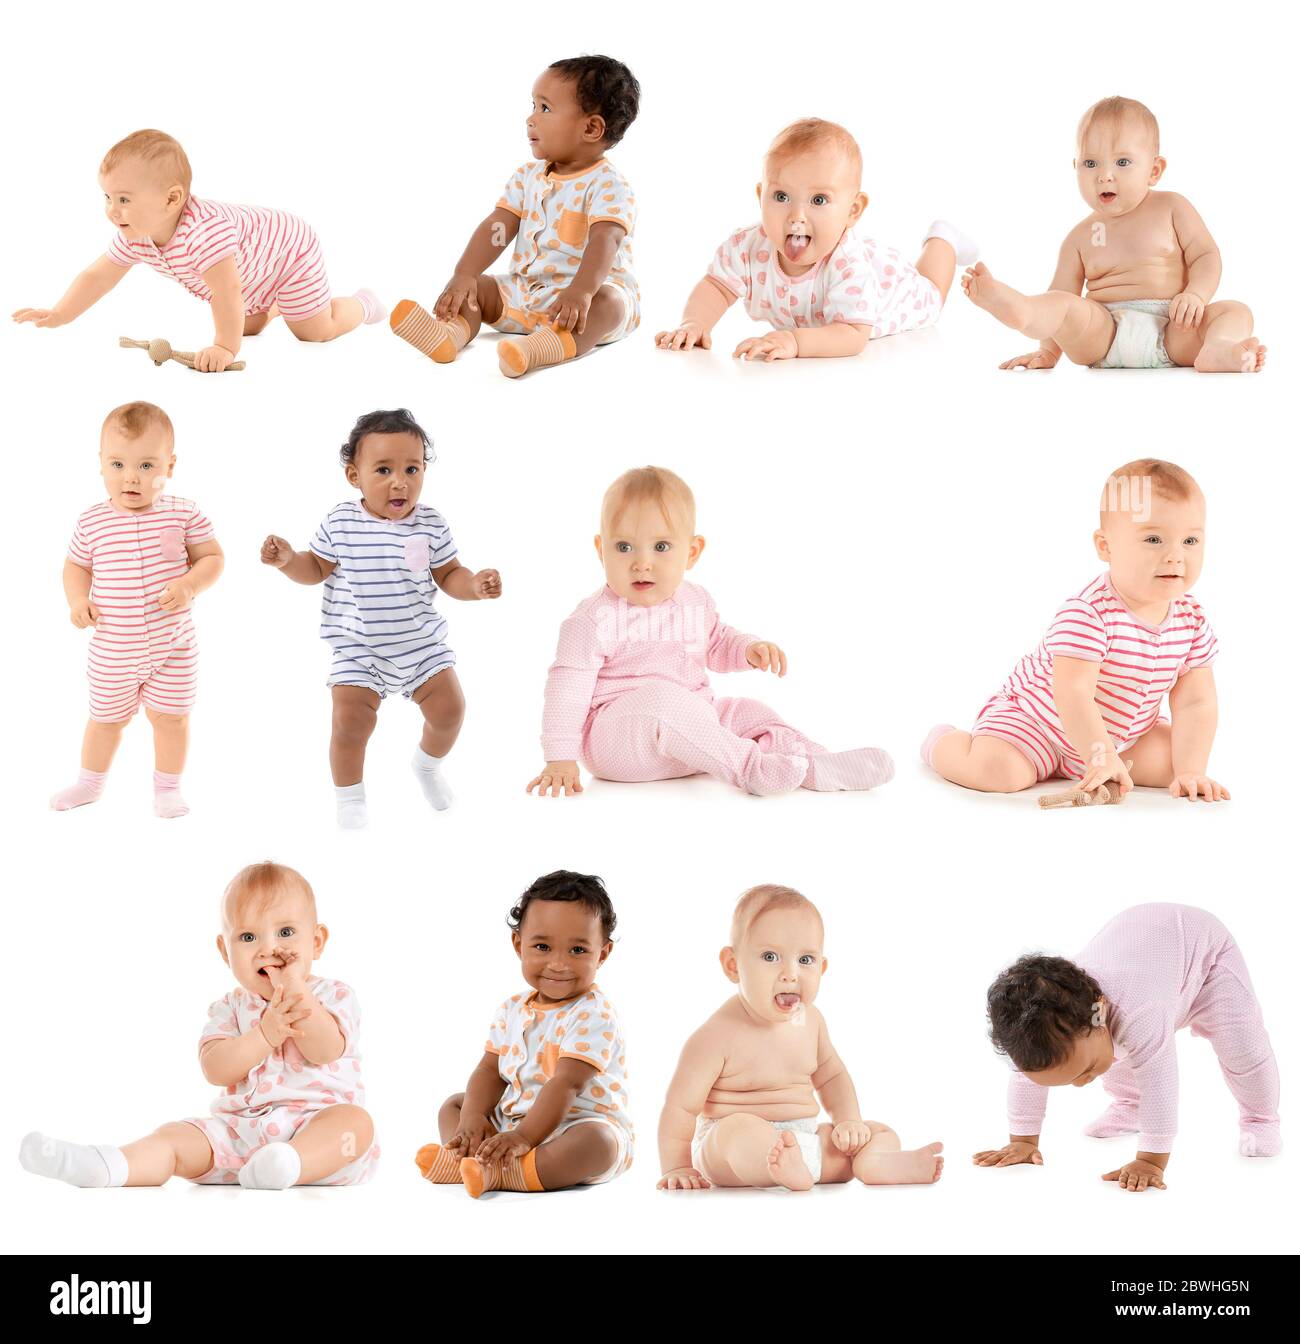 Collage With Cute Little Babies On White Background Stock Photo Alamy